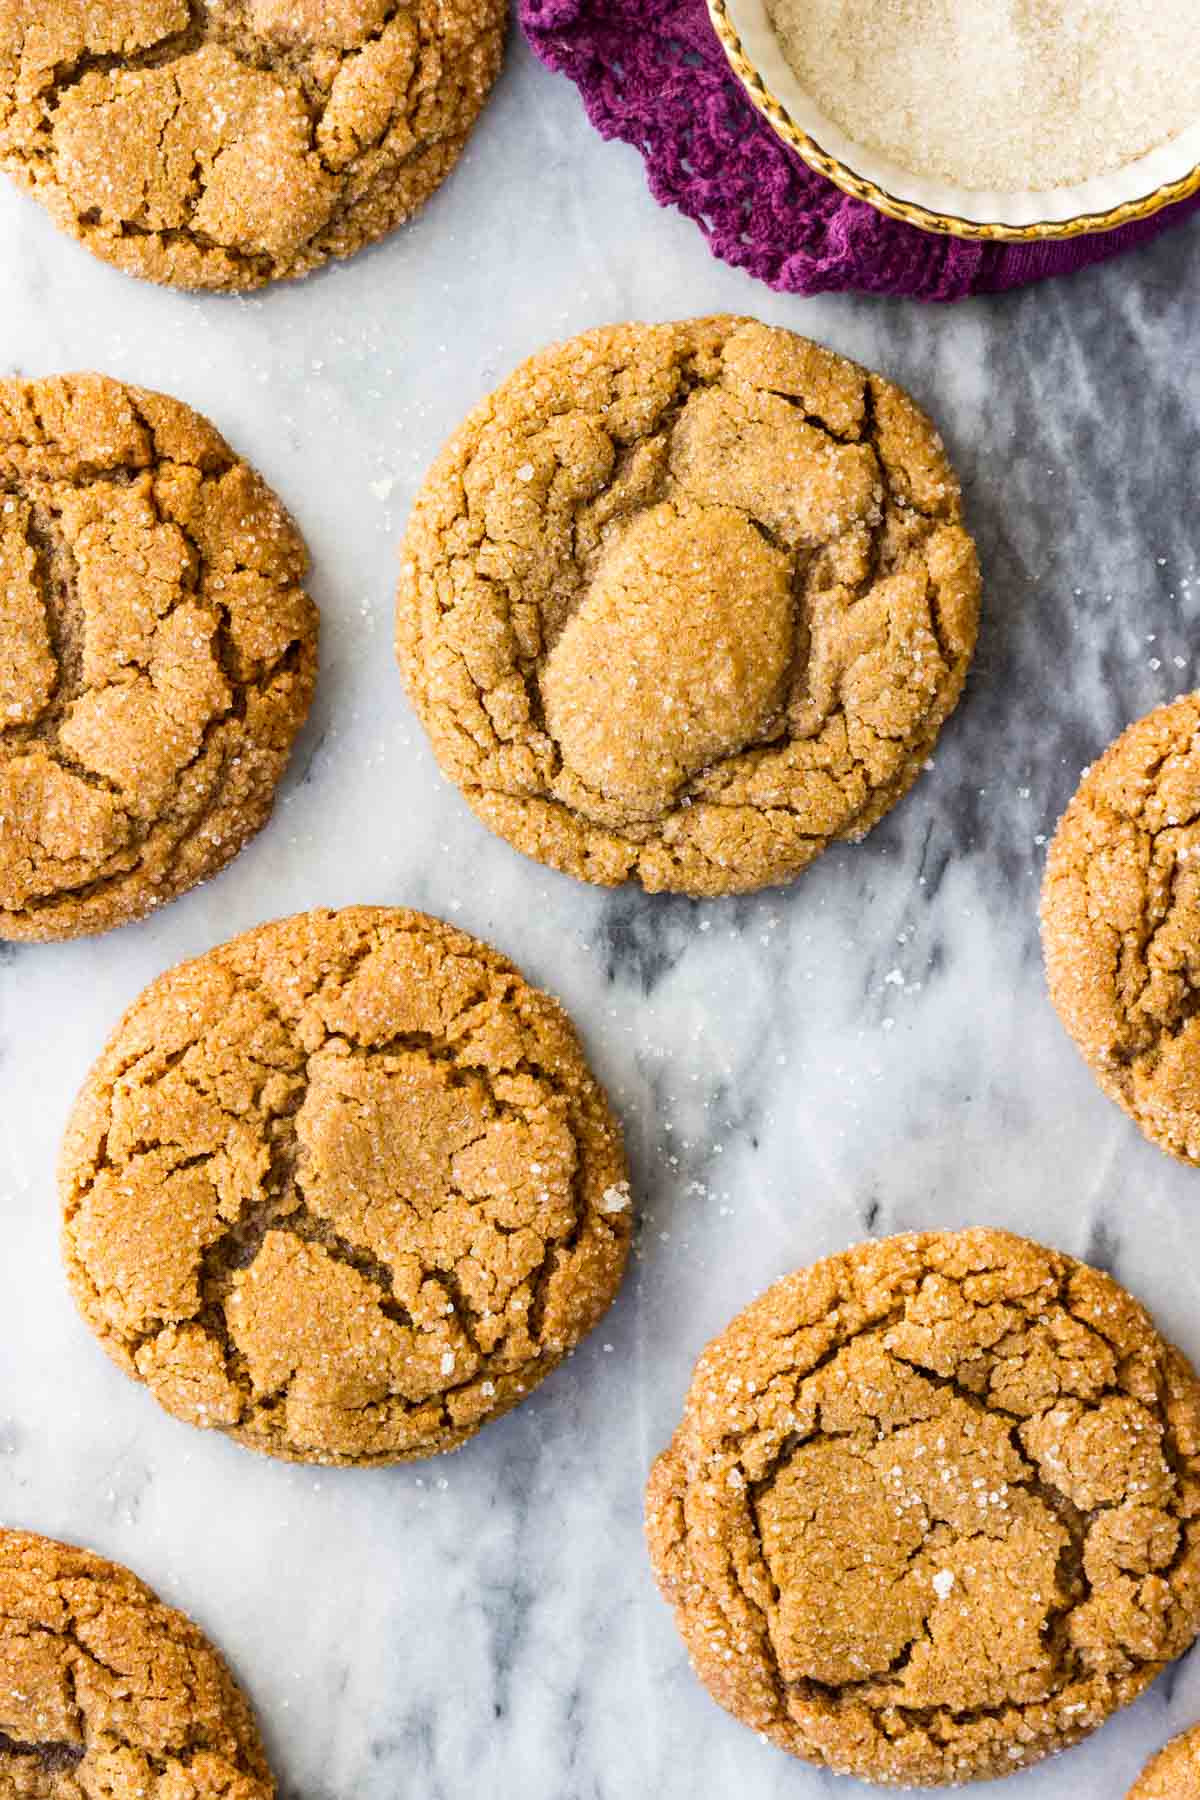 Overhead view of soft and chewy spice cookies with crackled, sugary exteriors.